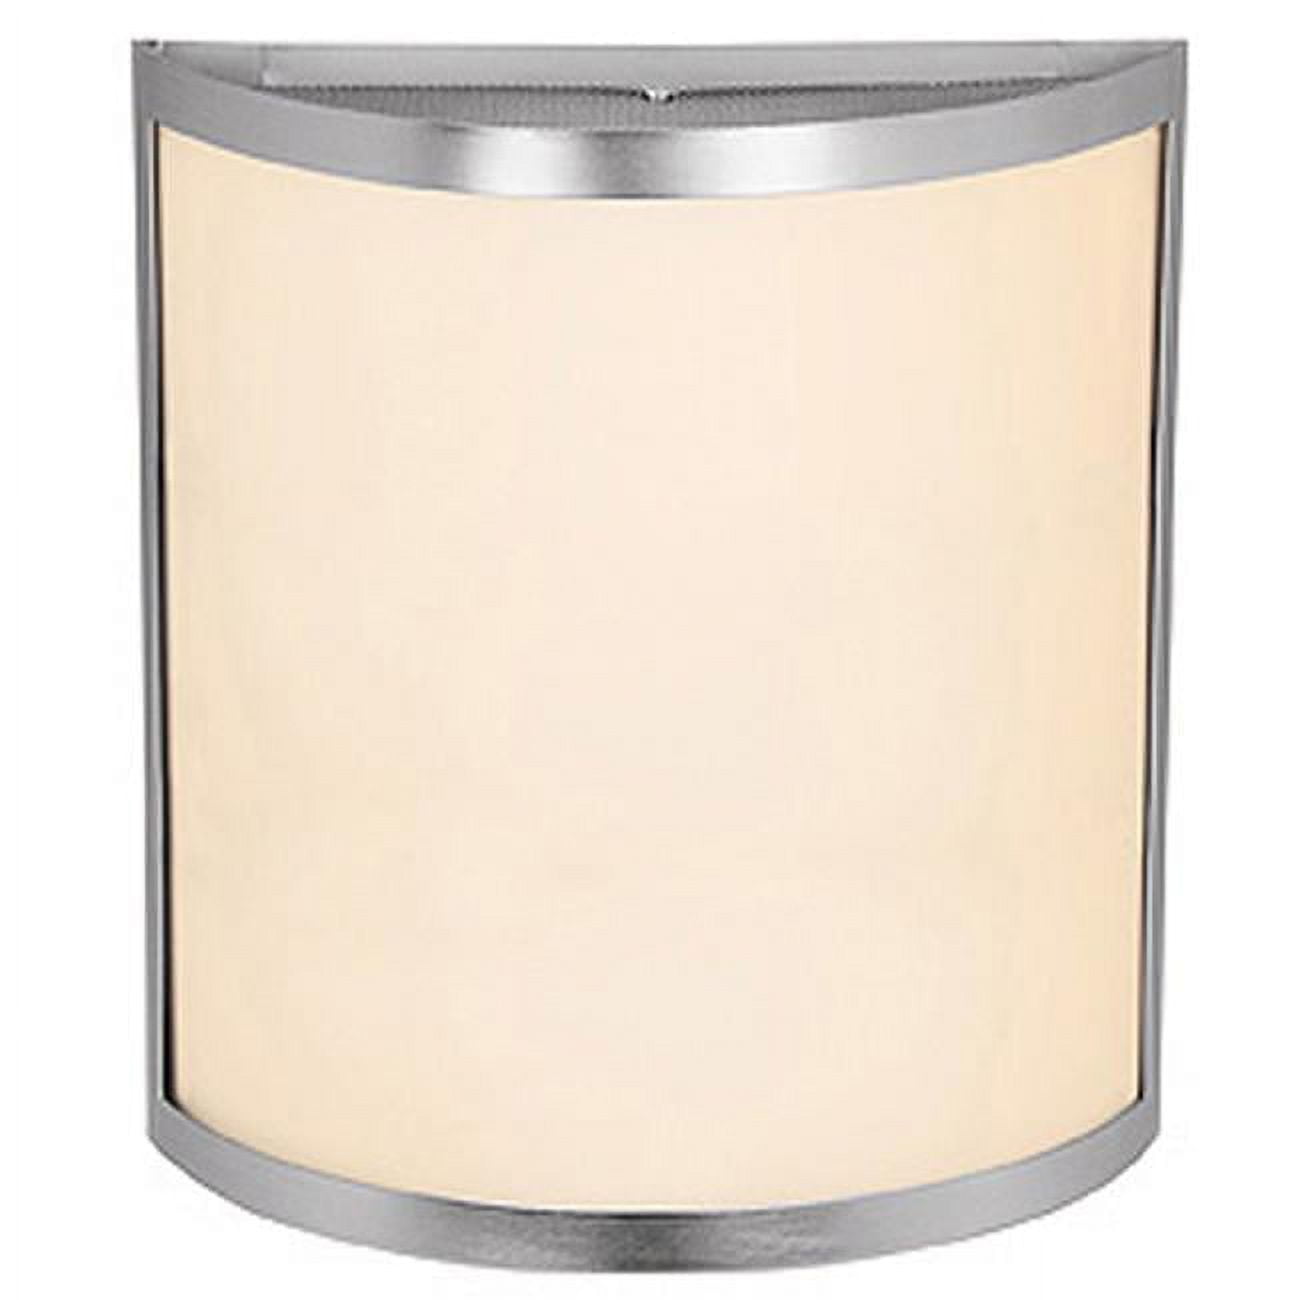 Picture of Access Lighting 20439LEDDLP-BS-OPL 10 in. Artemis LED Brushed Steel ADA Wall Sconce Light with Wall Fixture